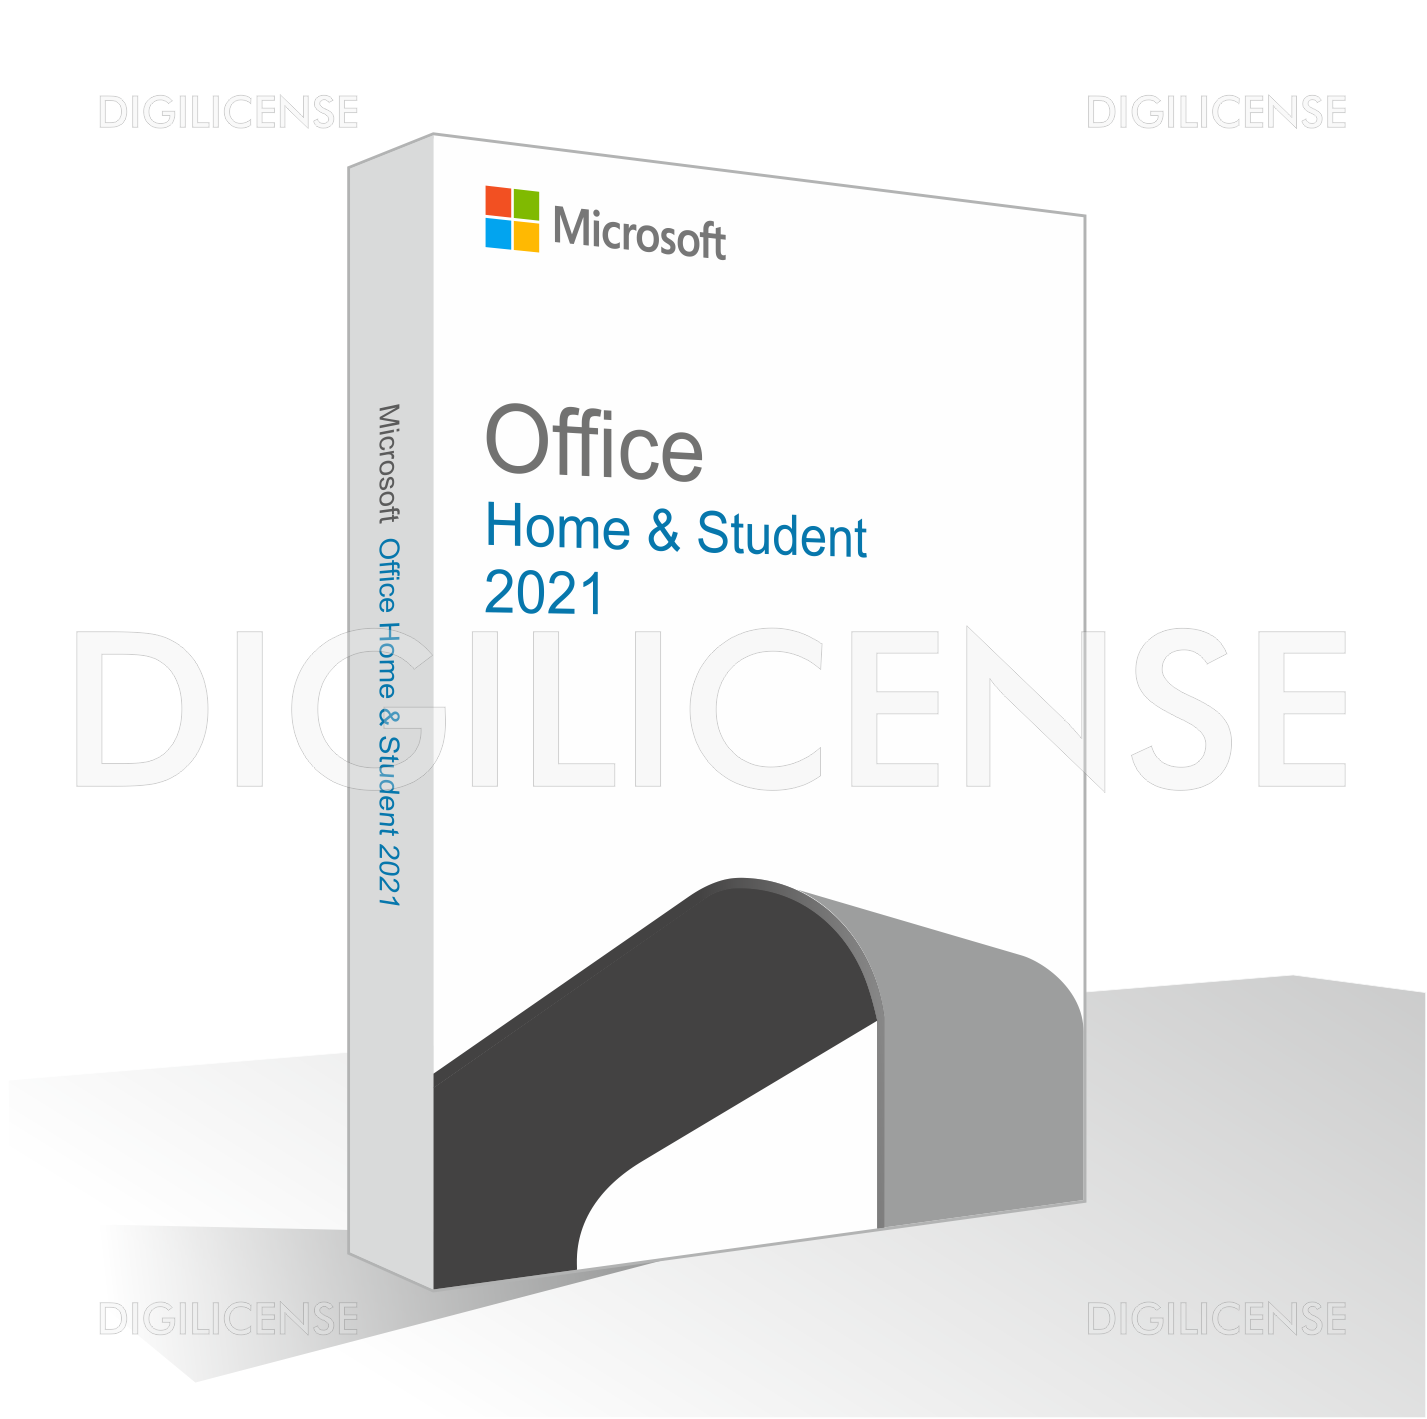  Microsoft Office Home & Student 2021